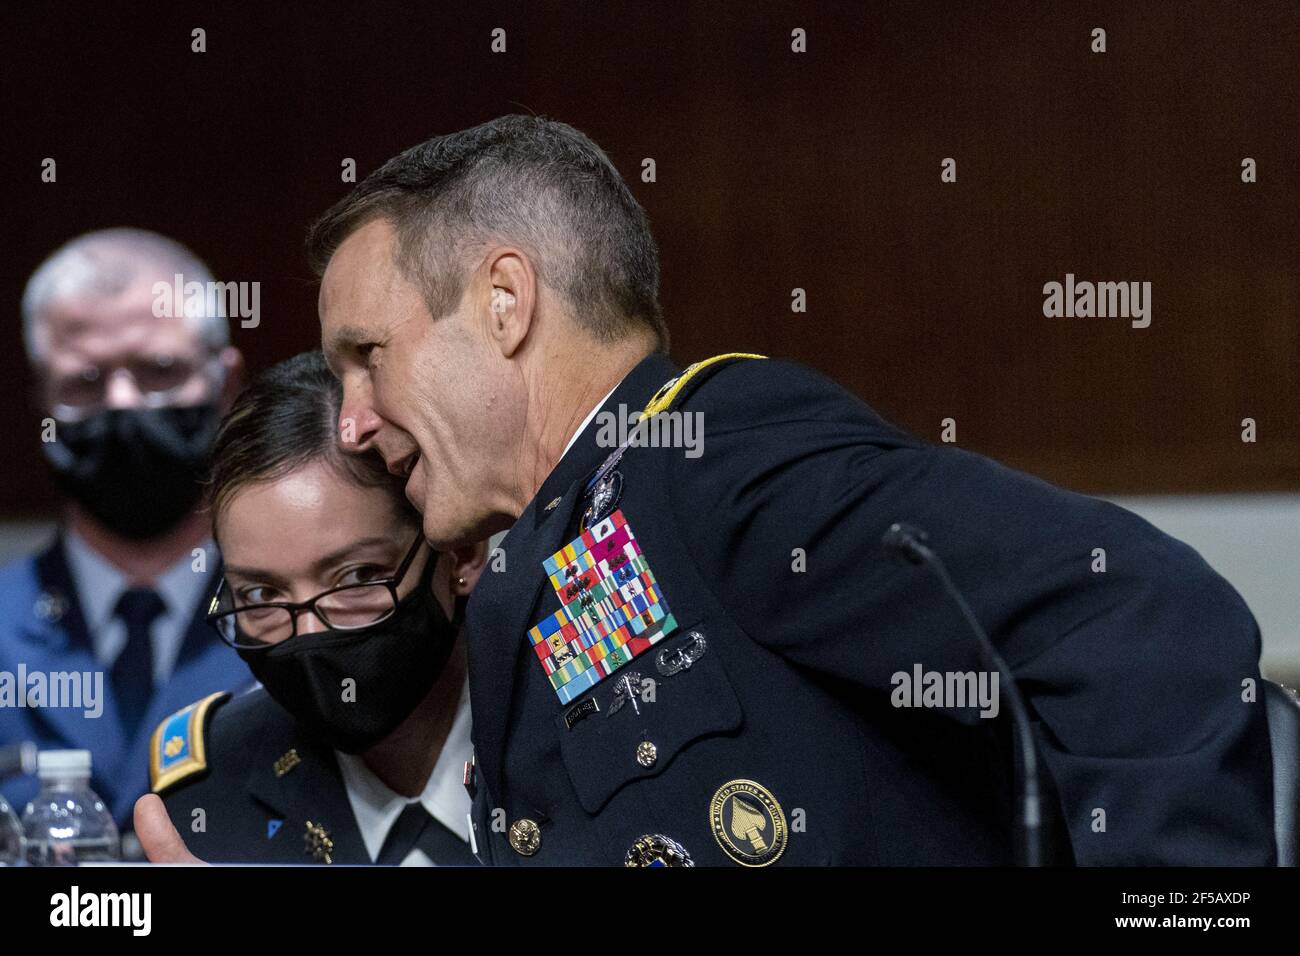 Washington, United States. 25th Mar, 2021. Special Operations Command Gen. Richard Clarke speaks with an aide during a hearing to examine United States Special Operations Command and United States Cyber Command in review of the Defense Authorization Request for fiscal year 2022 and the Future Years Defense Program, on Capitol Hill, Thursday, March 25, 2021, in Washington. Photo by Andrew Harnik/Pool/ABACAPRESS.COM Credit: Abaca Press/Alamy Live News Stock Photo